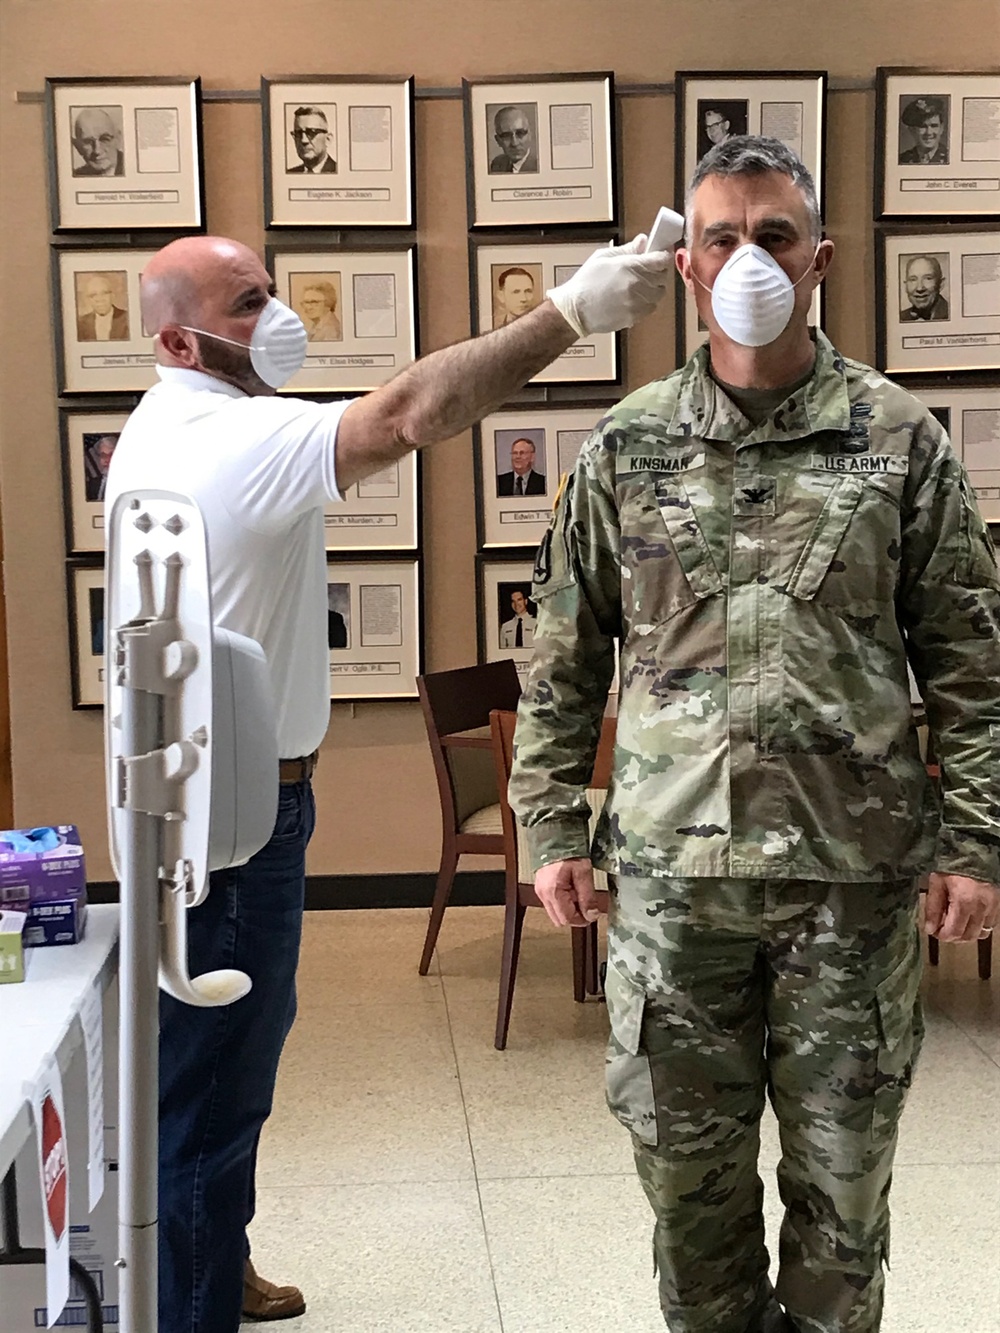 Commander gets temperature screening as district increases protective measures against COVID19